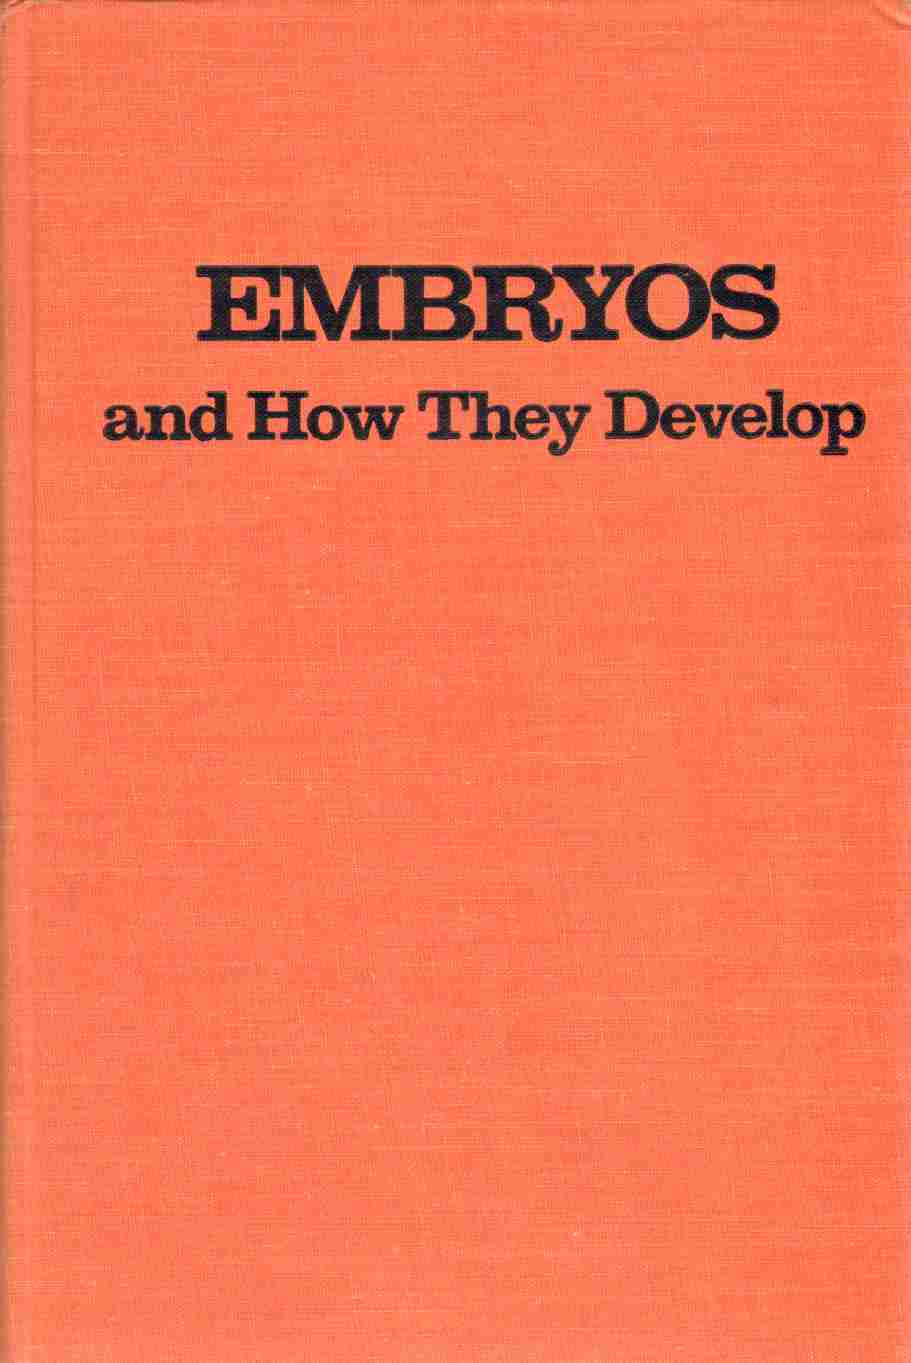 Jenkins, Marie M. - EMBRYOS AND HOW THEY DEVELOP